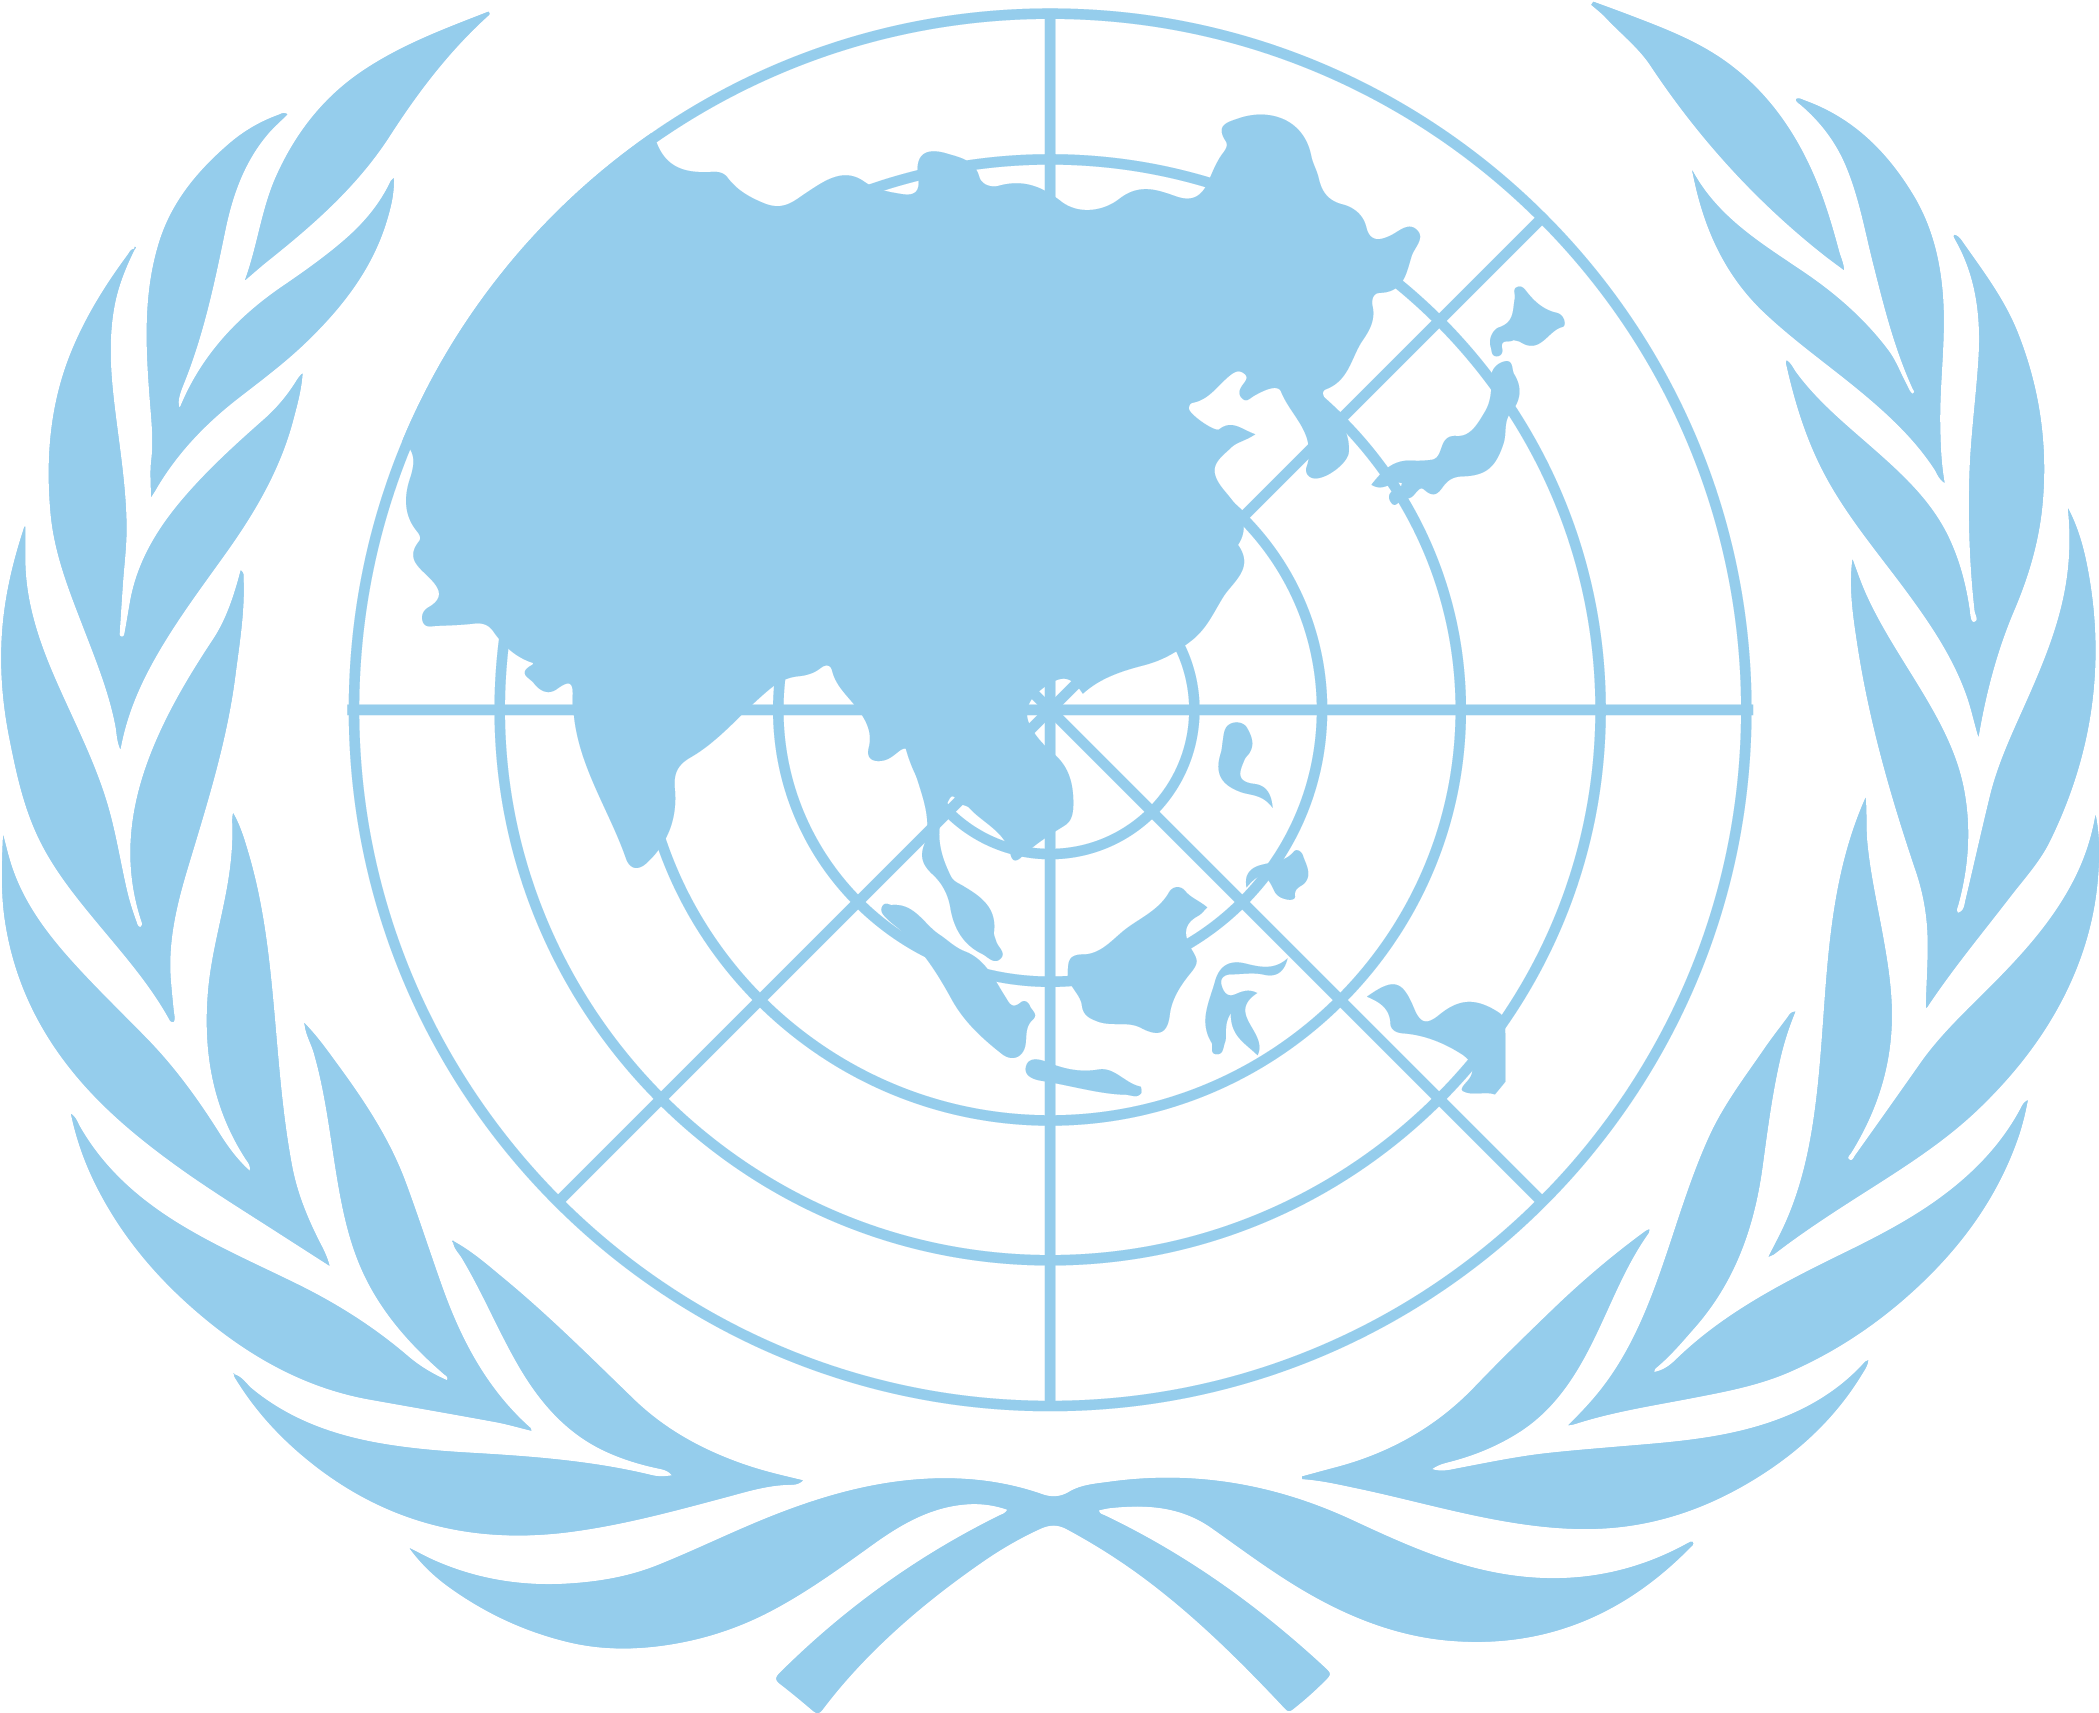 United Nations Flag PNG Images Transparent Background | PNG Play